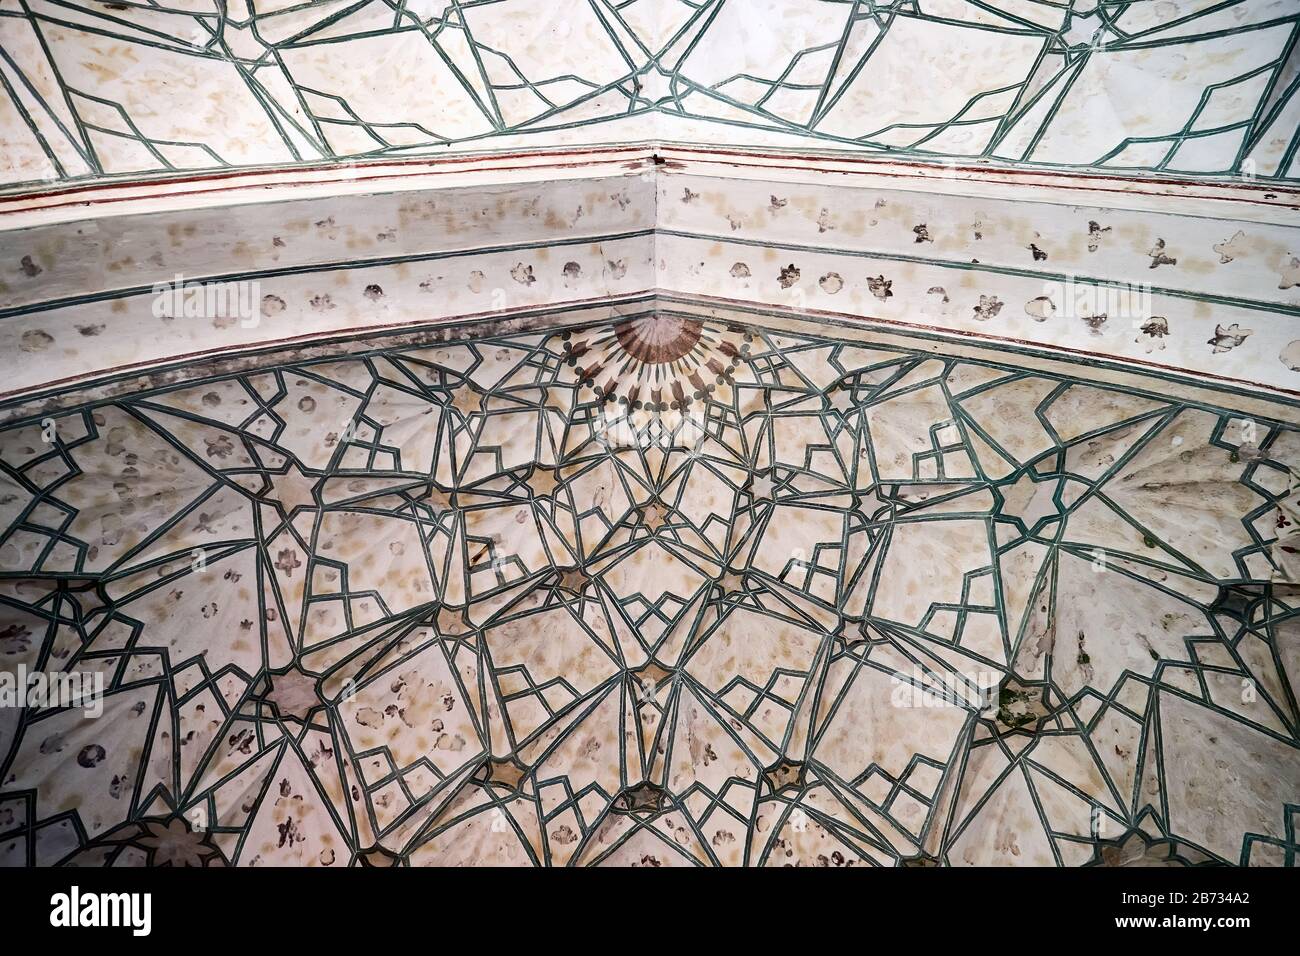 Geometric decoration of Islamic architecture. Detail of mosaic of ceramic tiles in Jama Masjid Mosque in old Delhi, India. Stock Photo